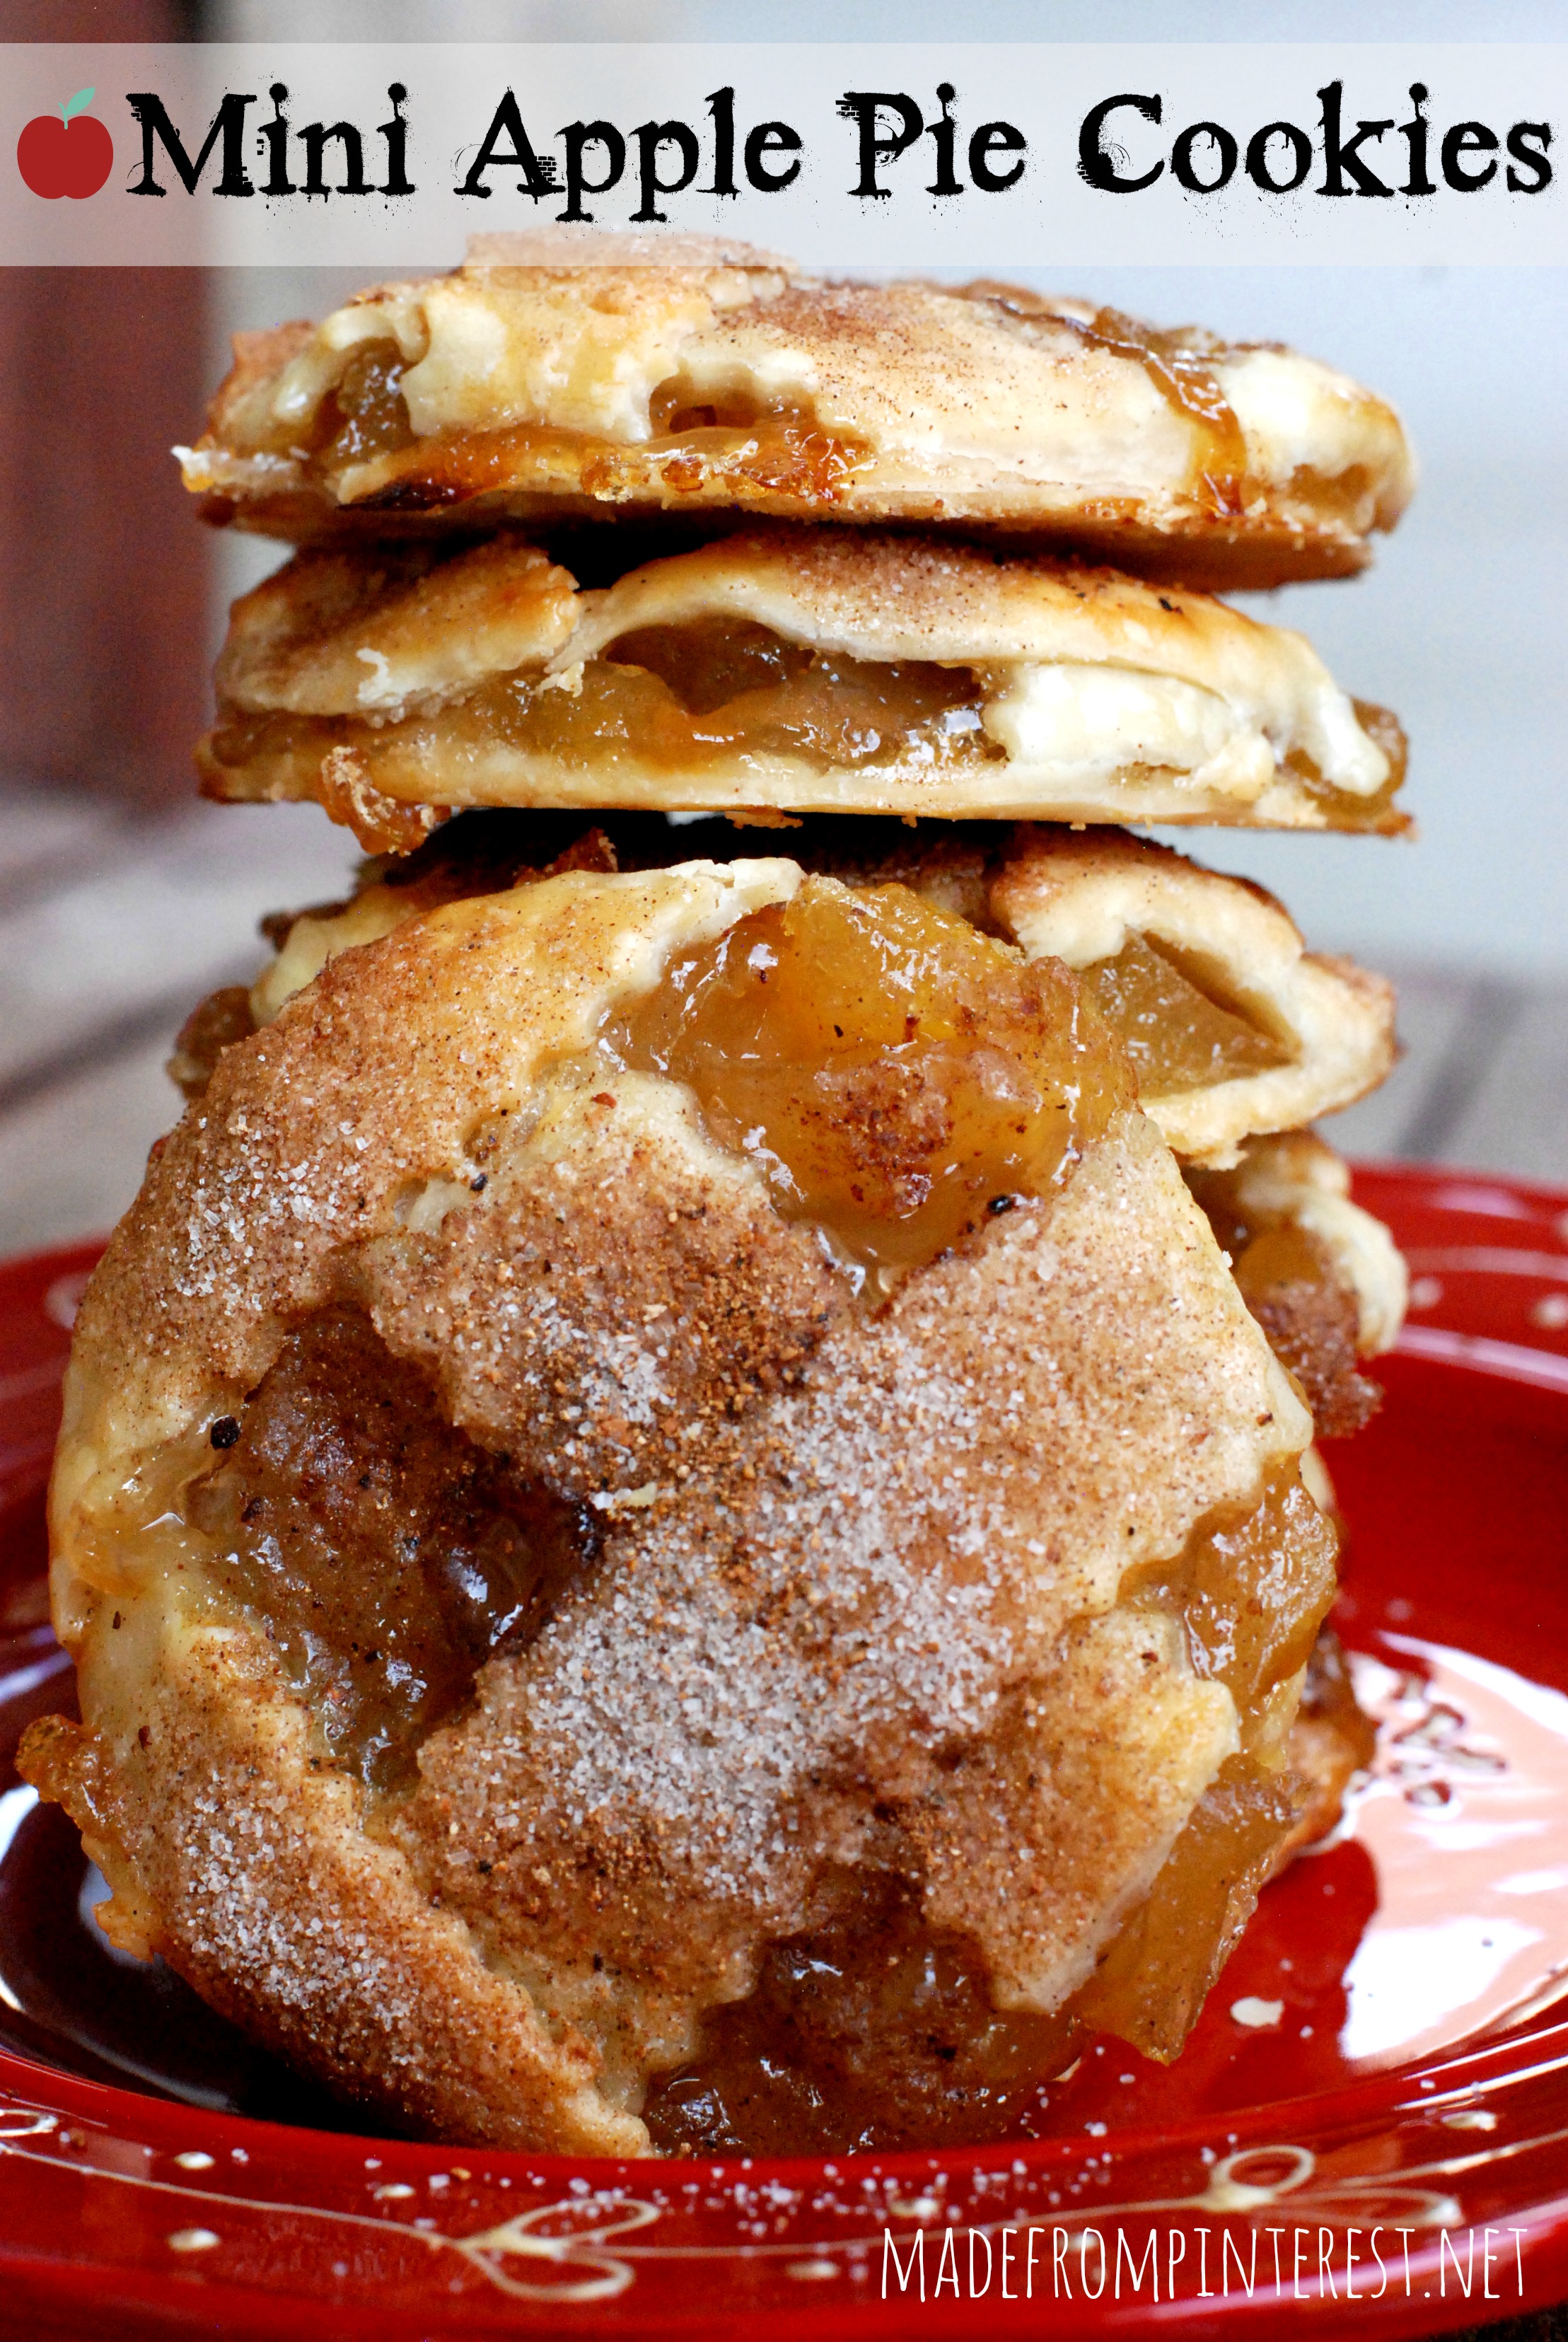 Mini Apple Pie Cookies. A perfect fall treat! madefrominterest.net